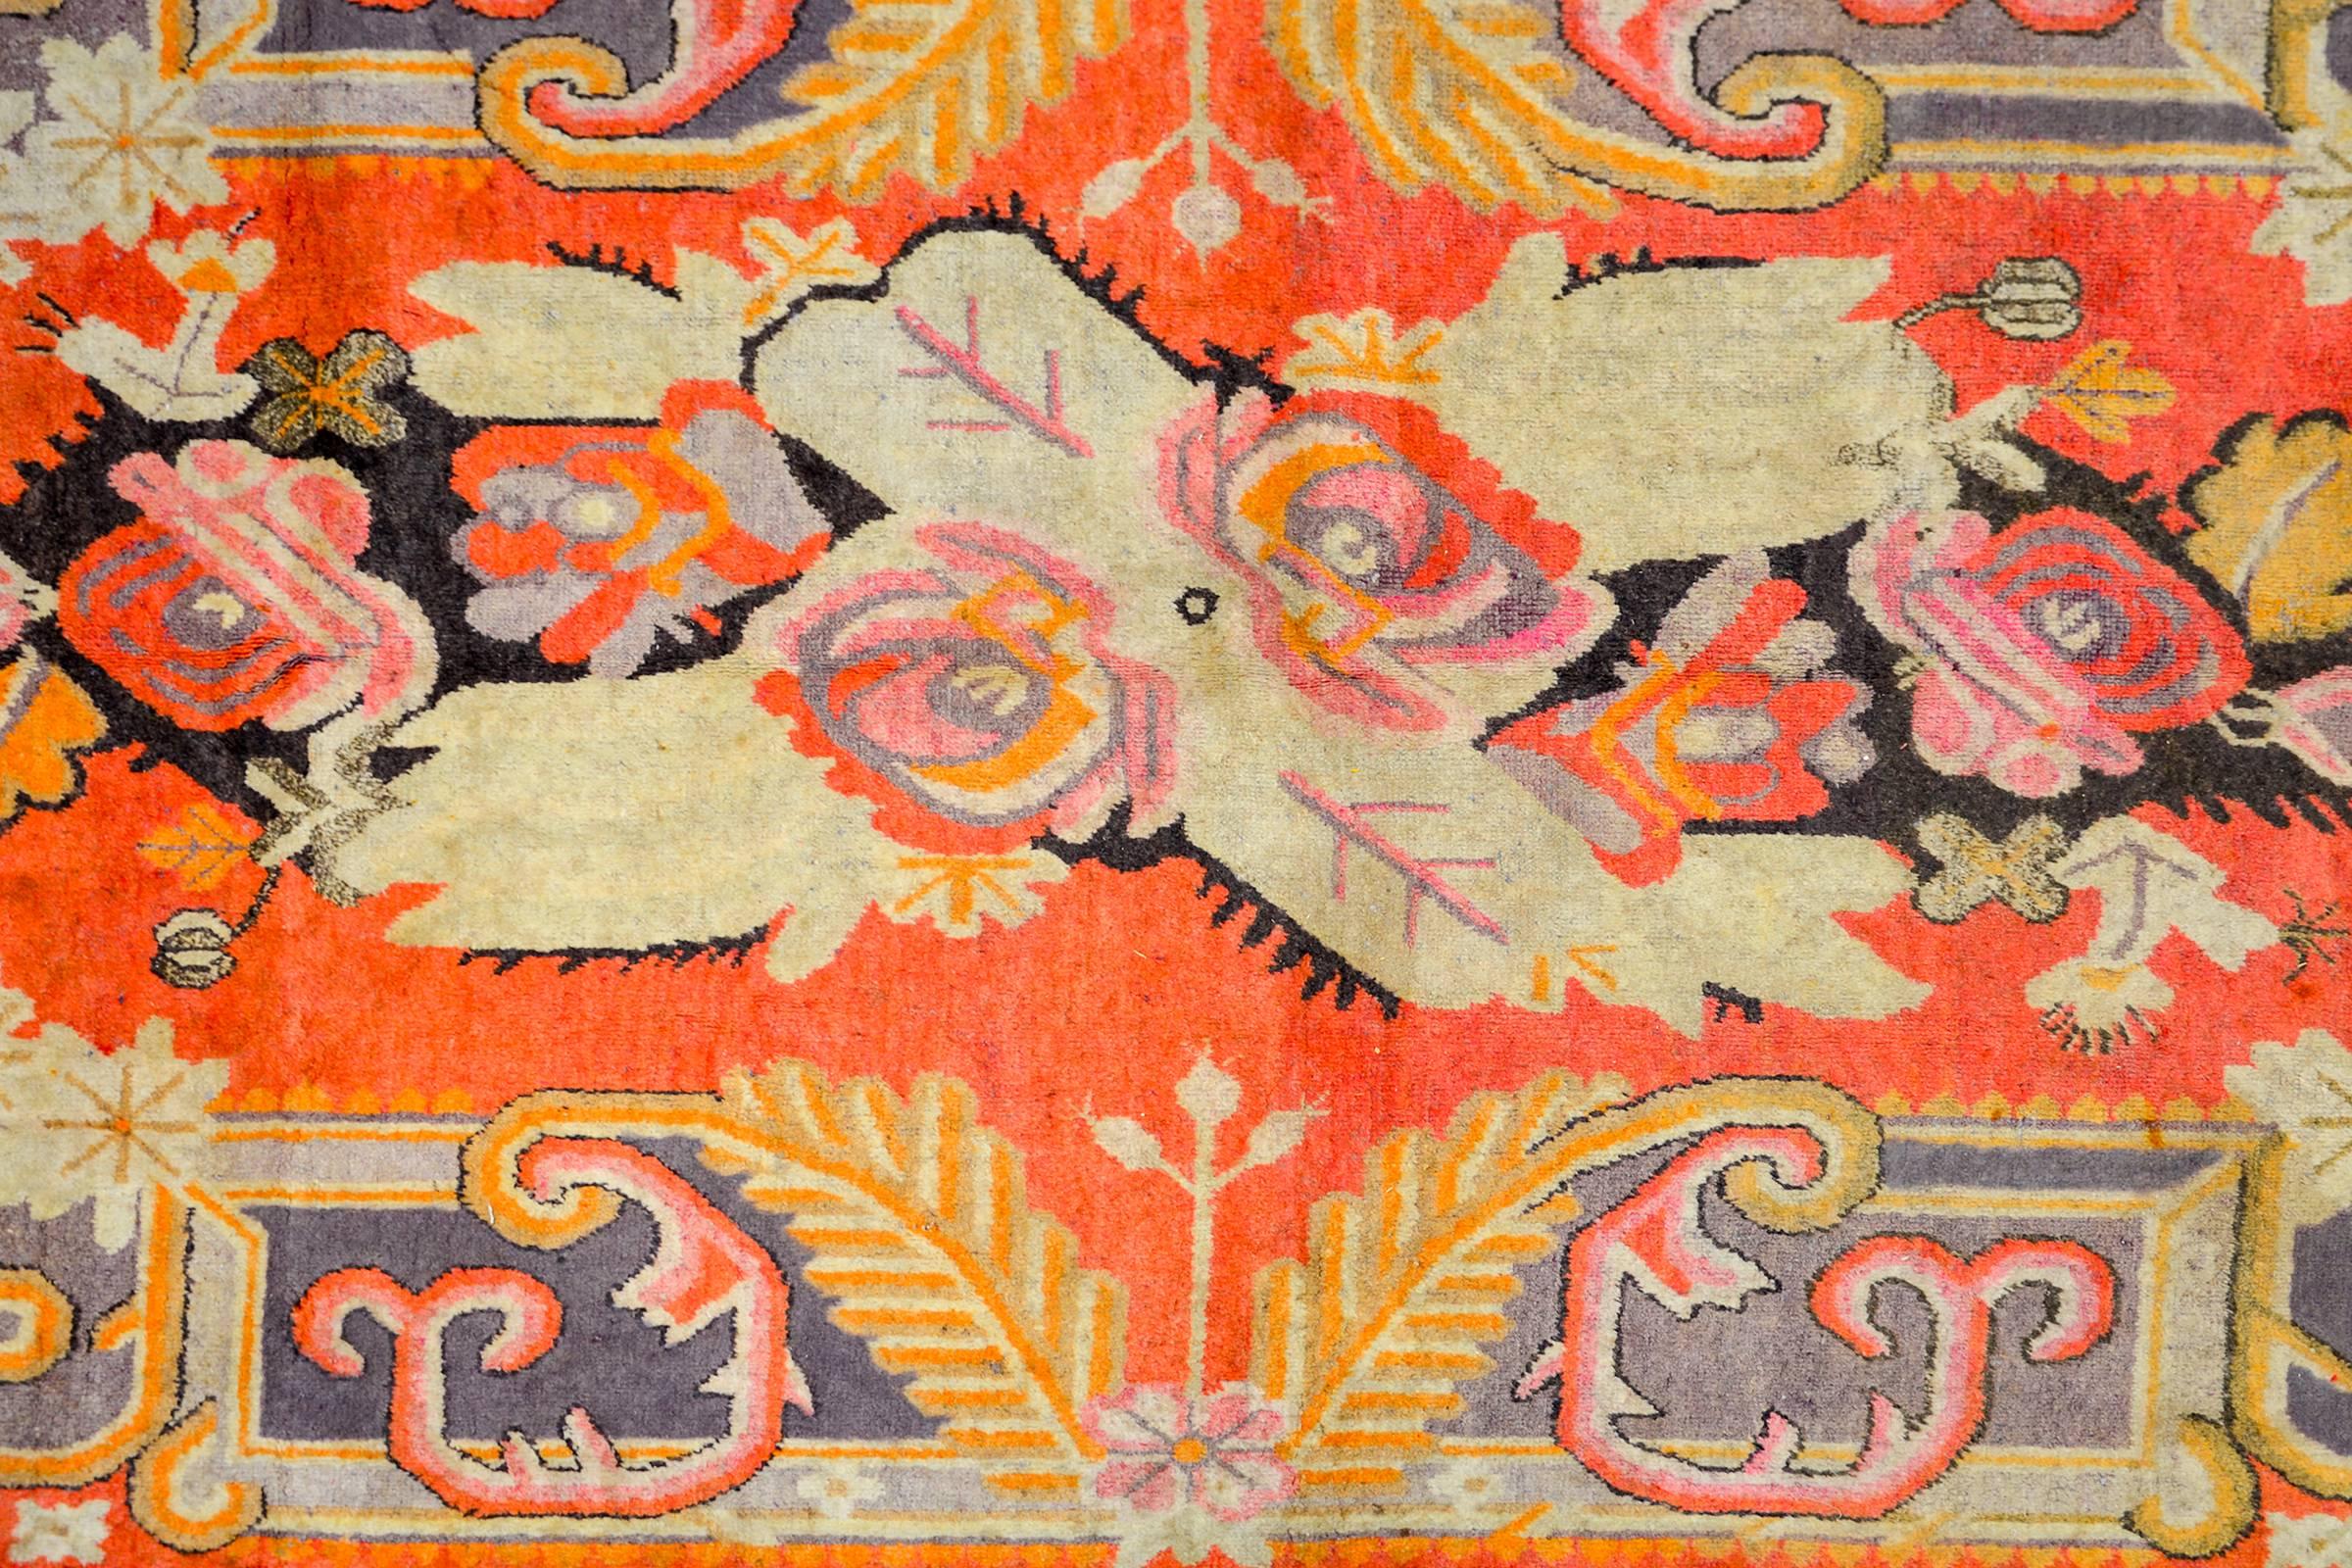 An extraordinary early 20th century Central Asian Khotan rug with an incredible asymmetrical large-scale floral medallion woven in crimson, violet, pink, orange, black, and cream colored wool. The medallion lives amidst a crimson field with